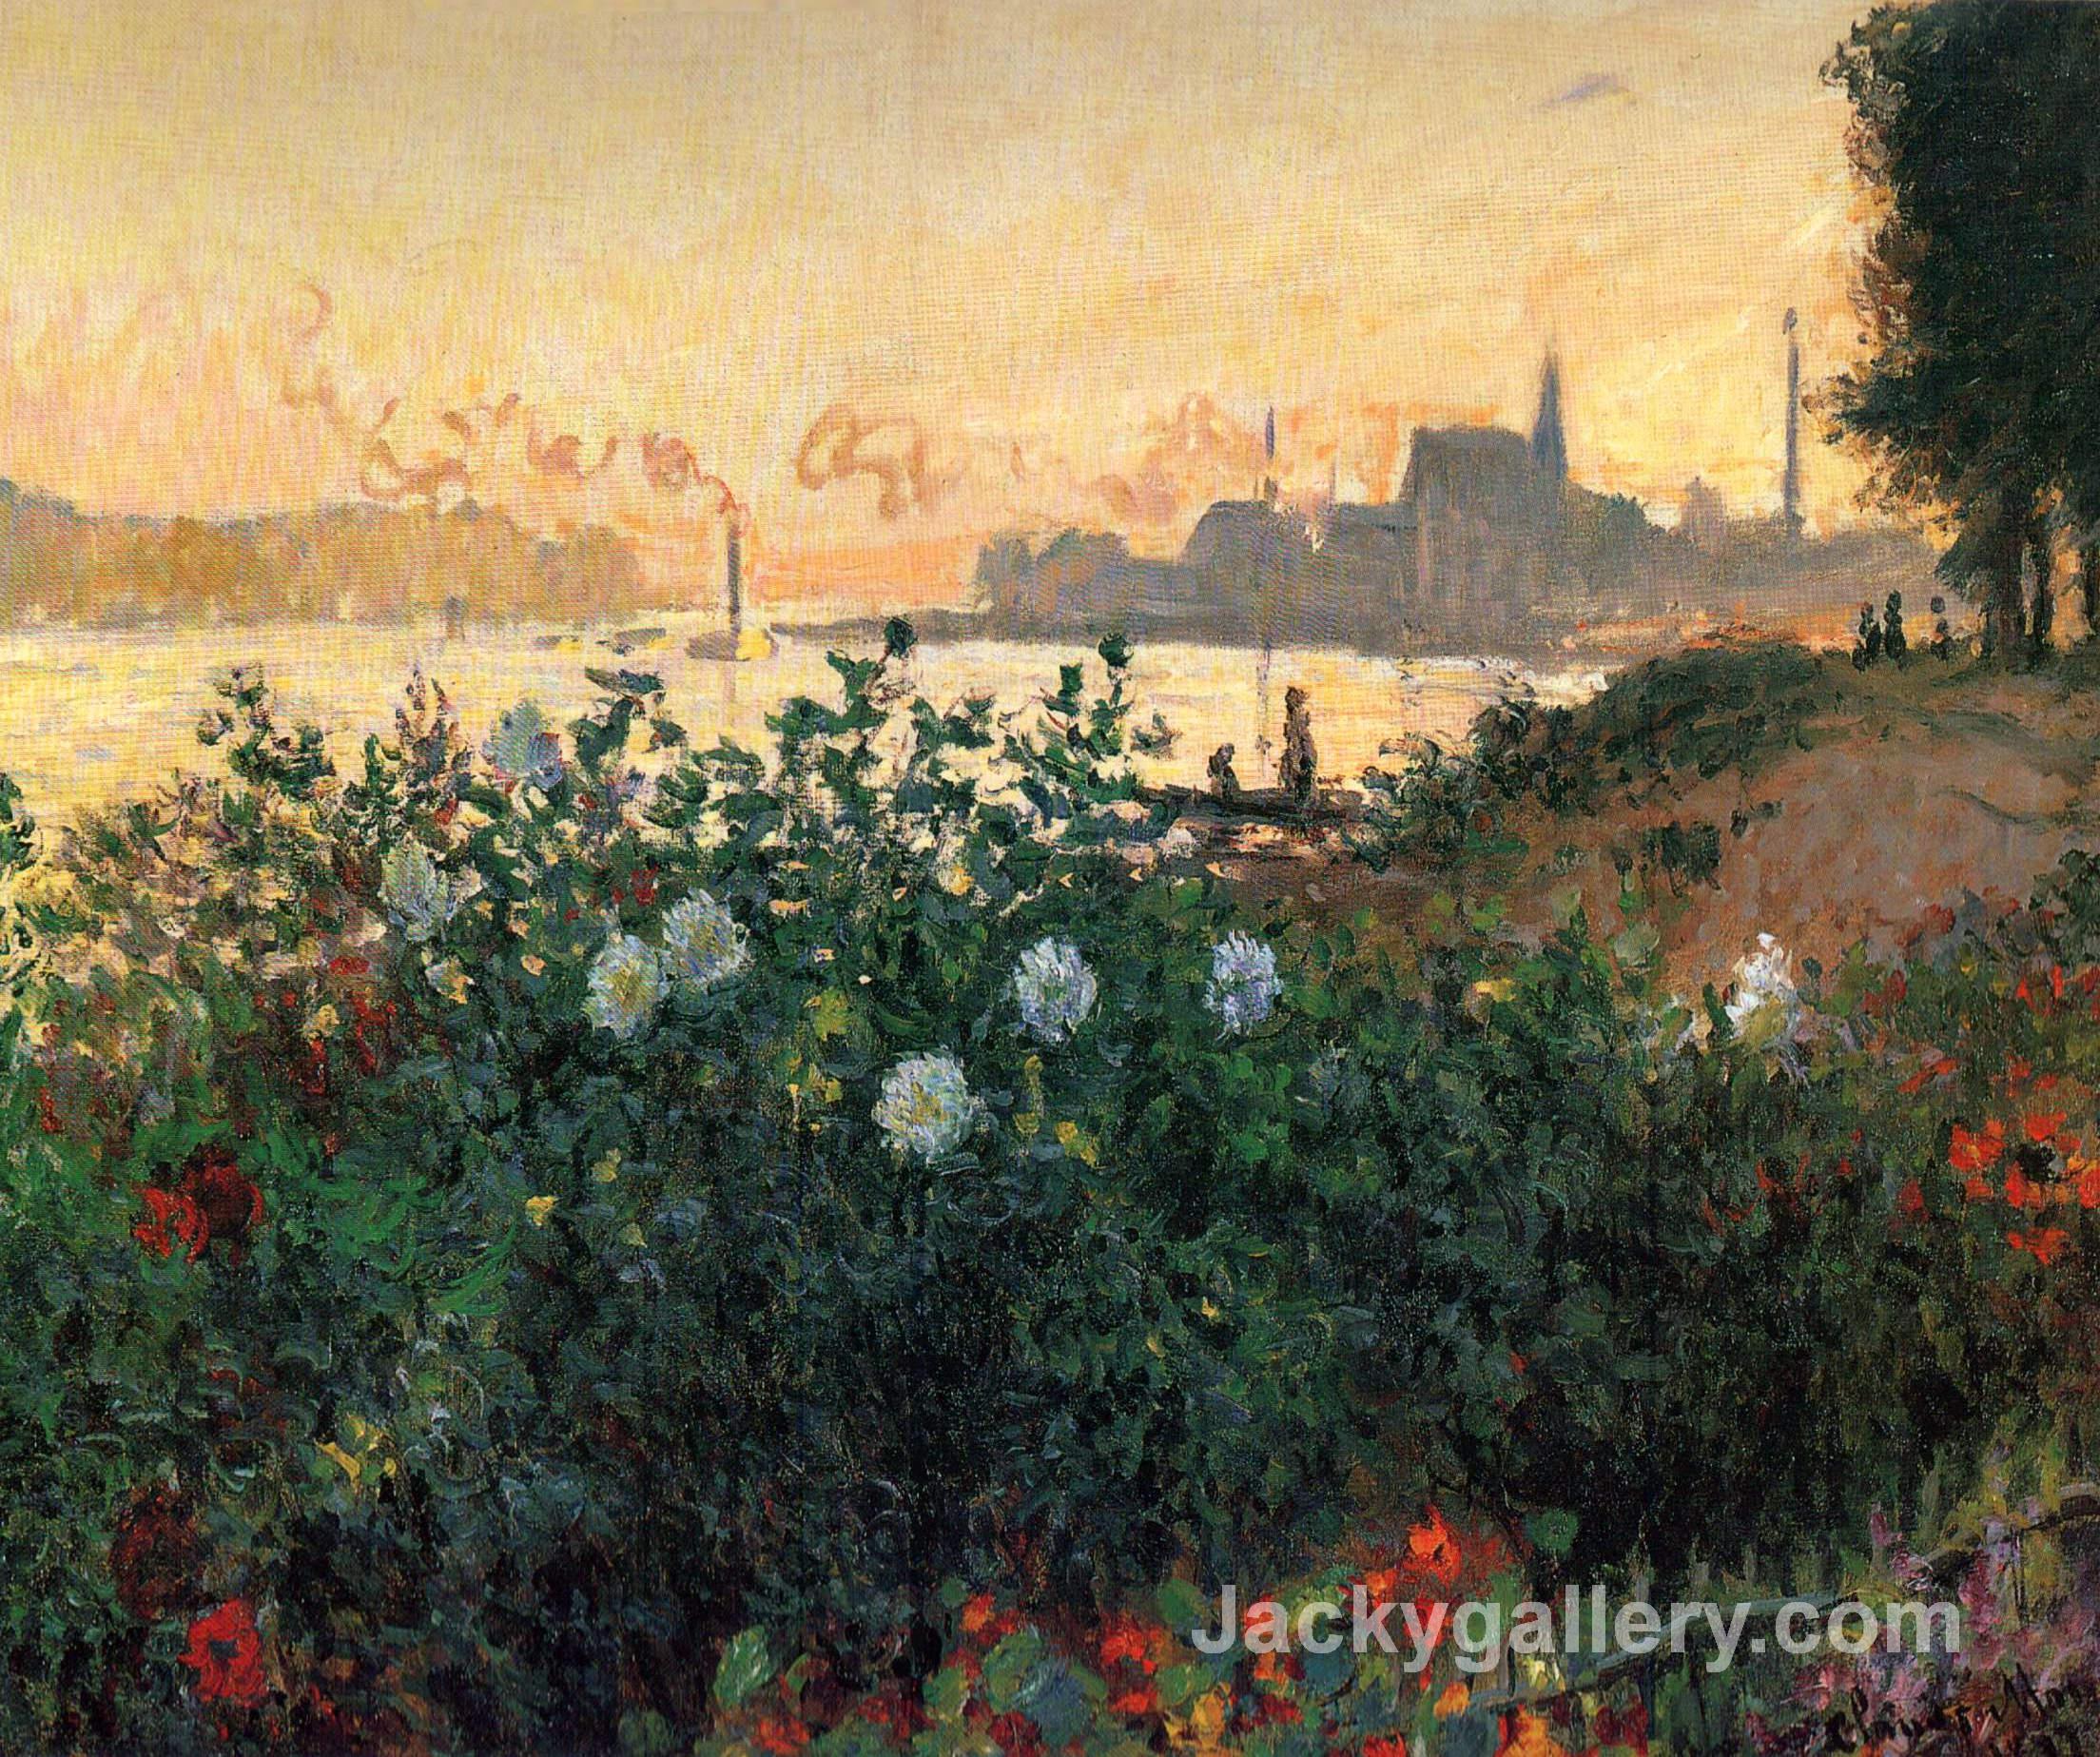 Argenteuil, Flowers by the Riverbank by Claude Monet paintings reproduction